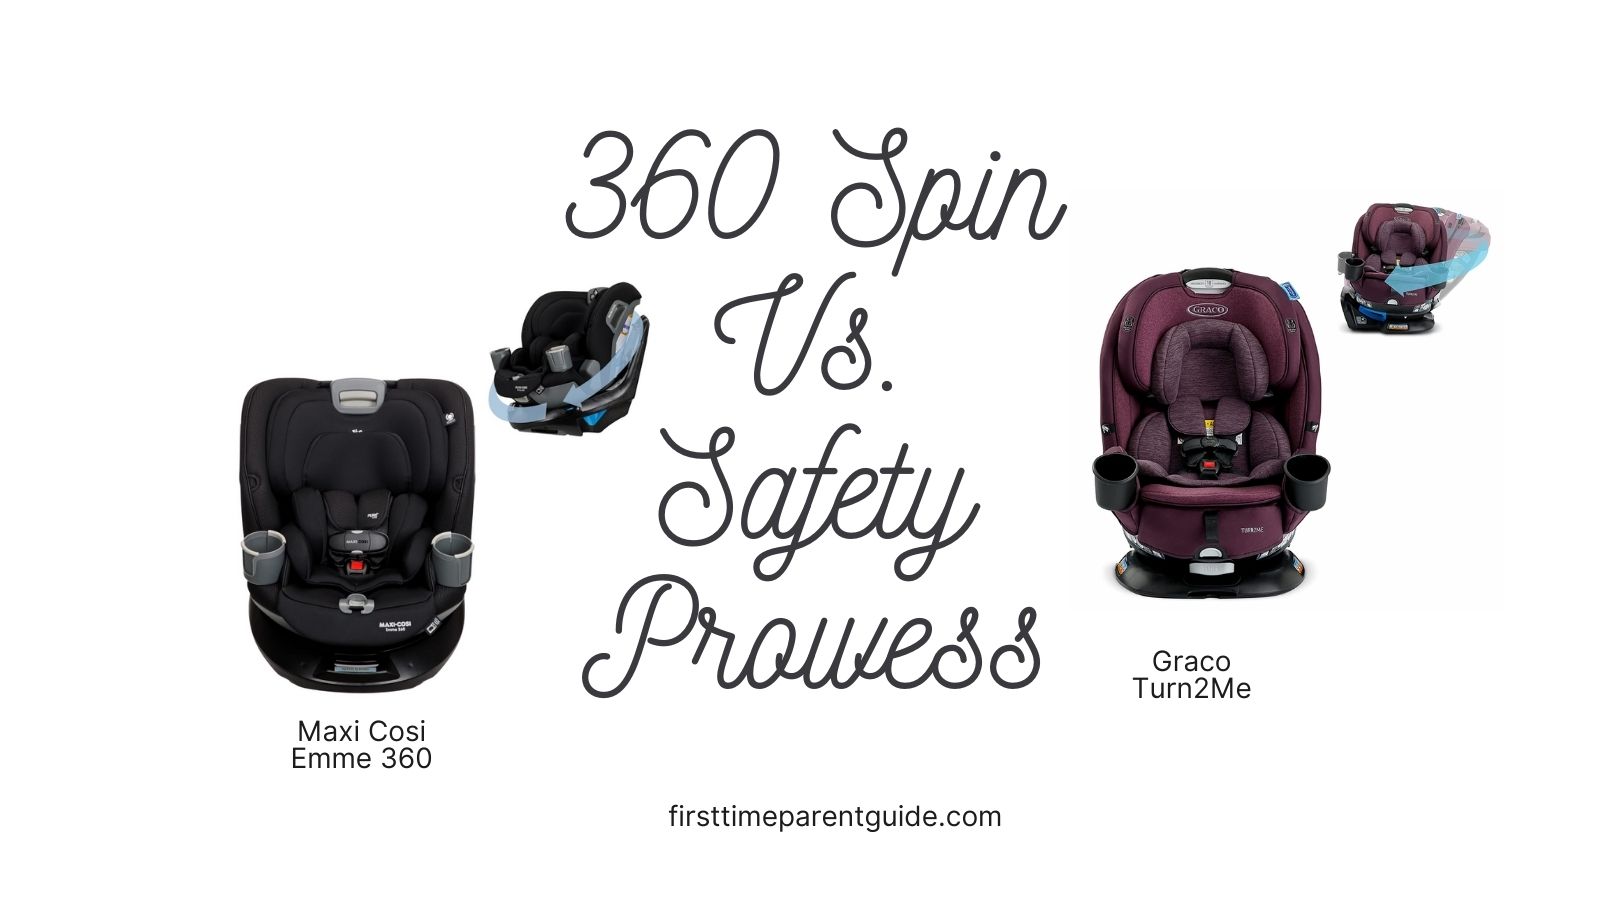 The Maxi Cosi Emme 360 And